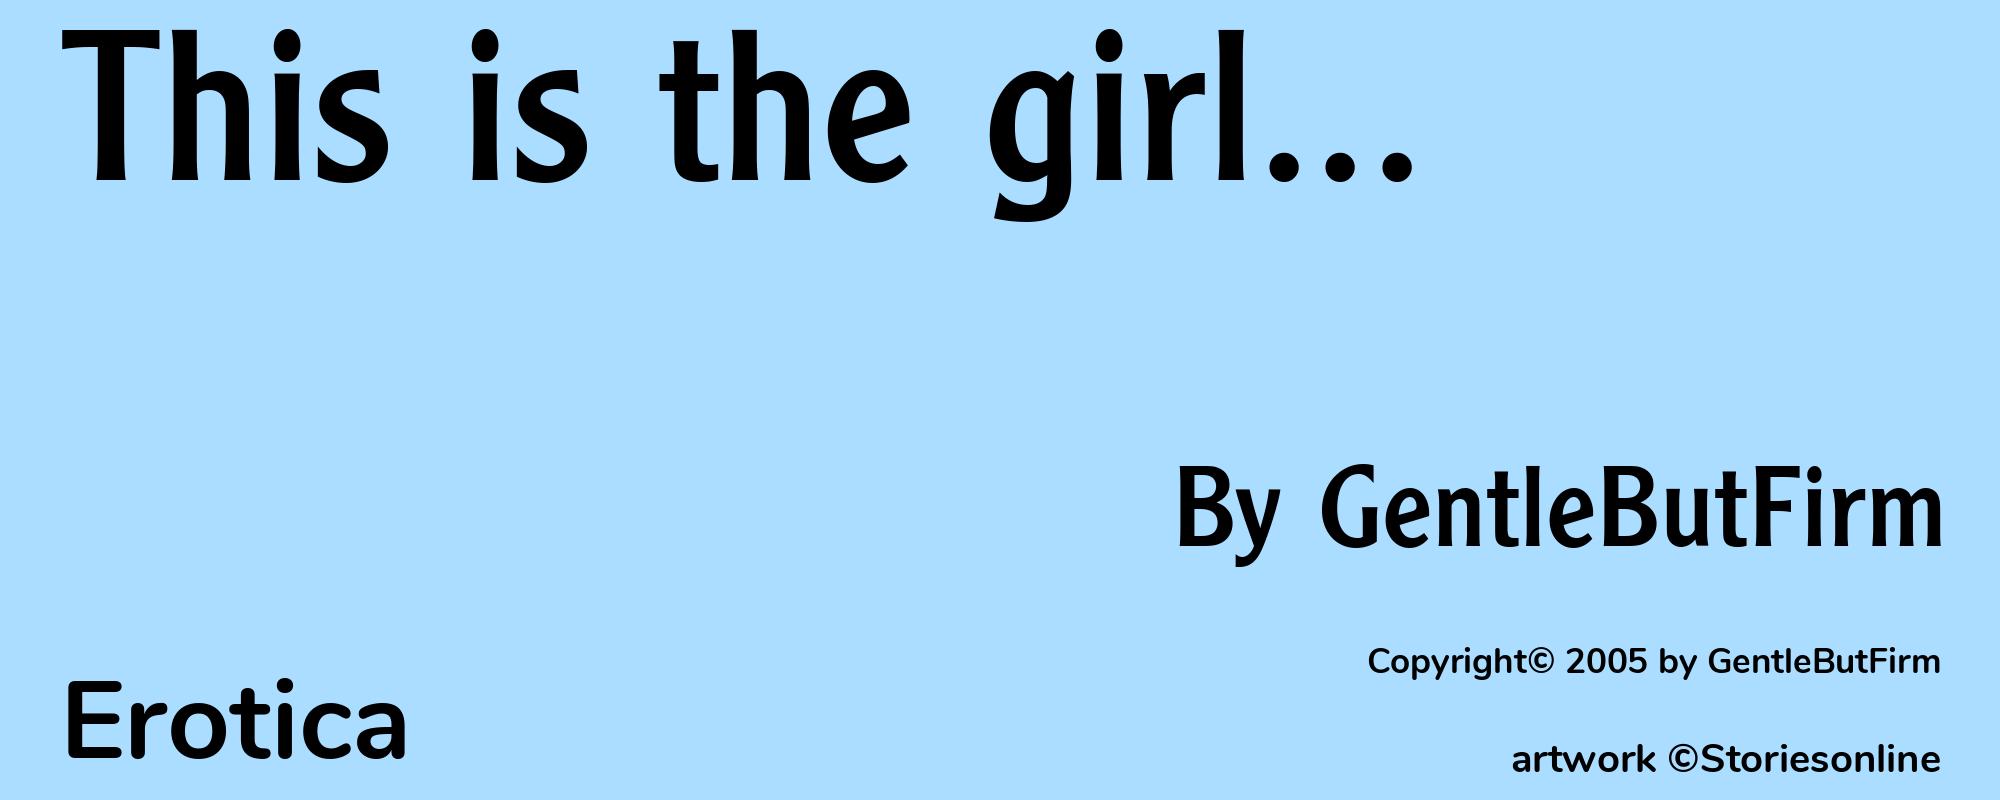 This is the girl... - Cover